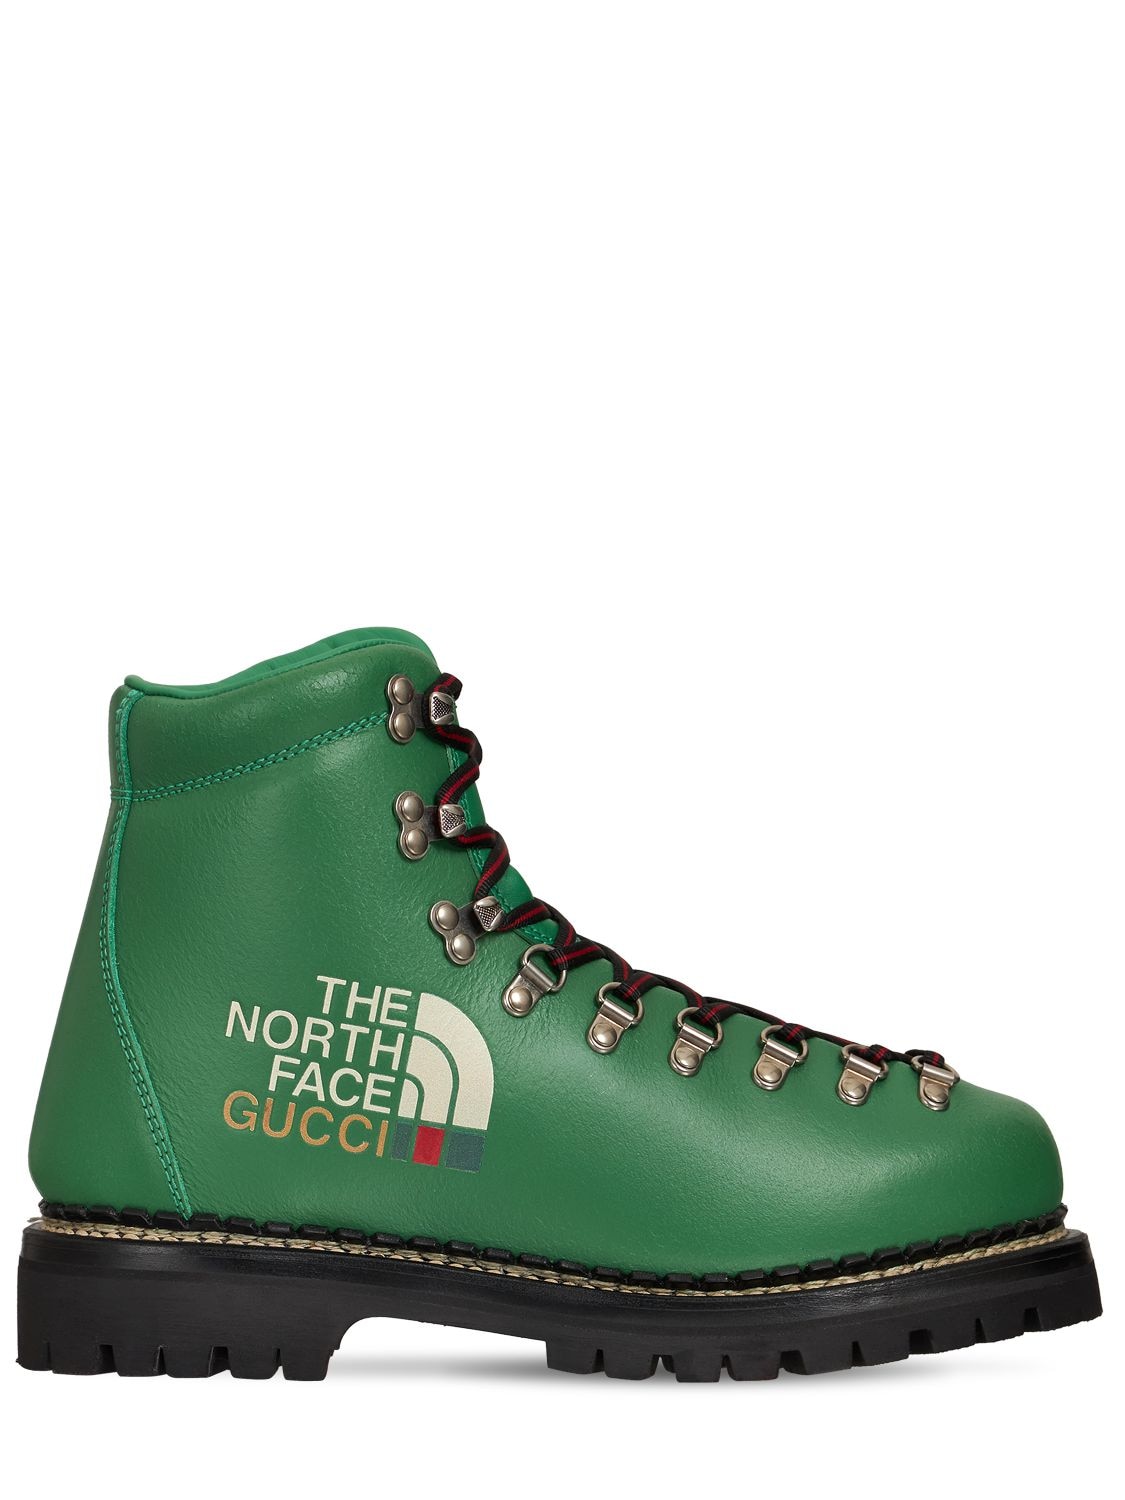 GUCCI X The North Face Leather Hiking Boots for Women